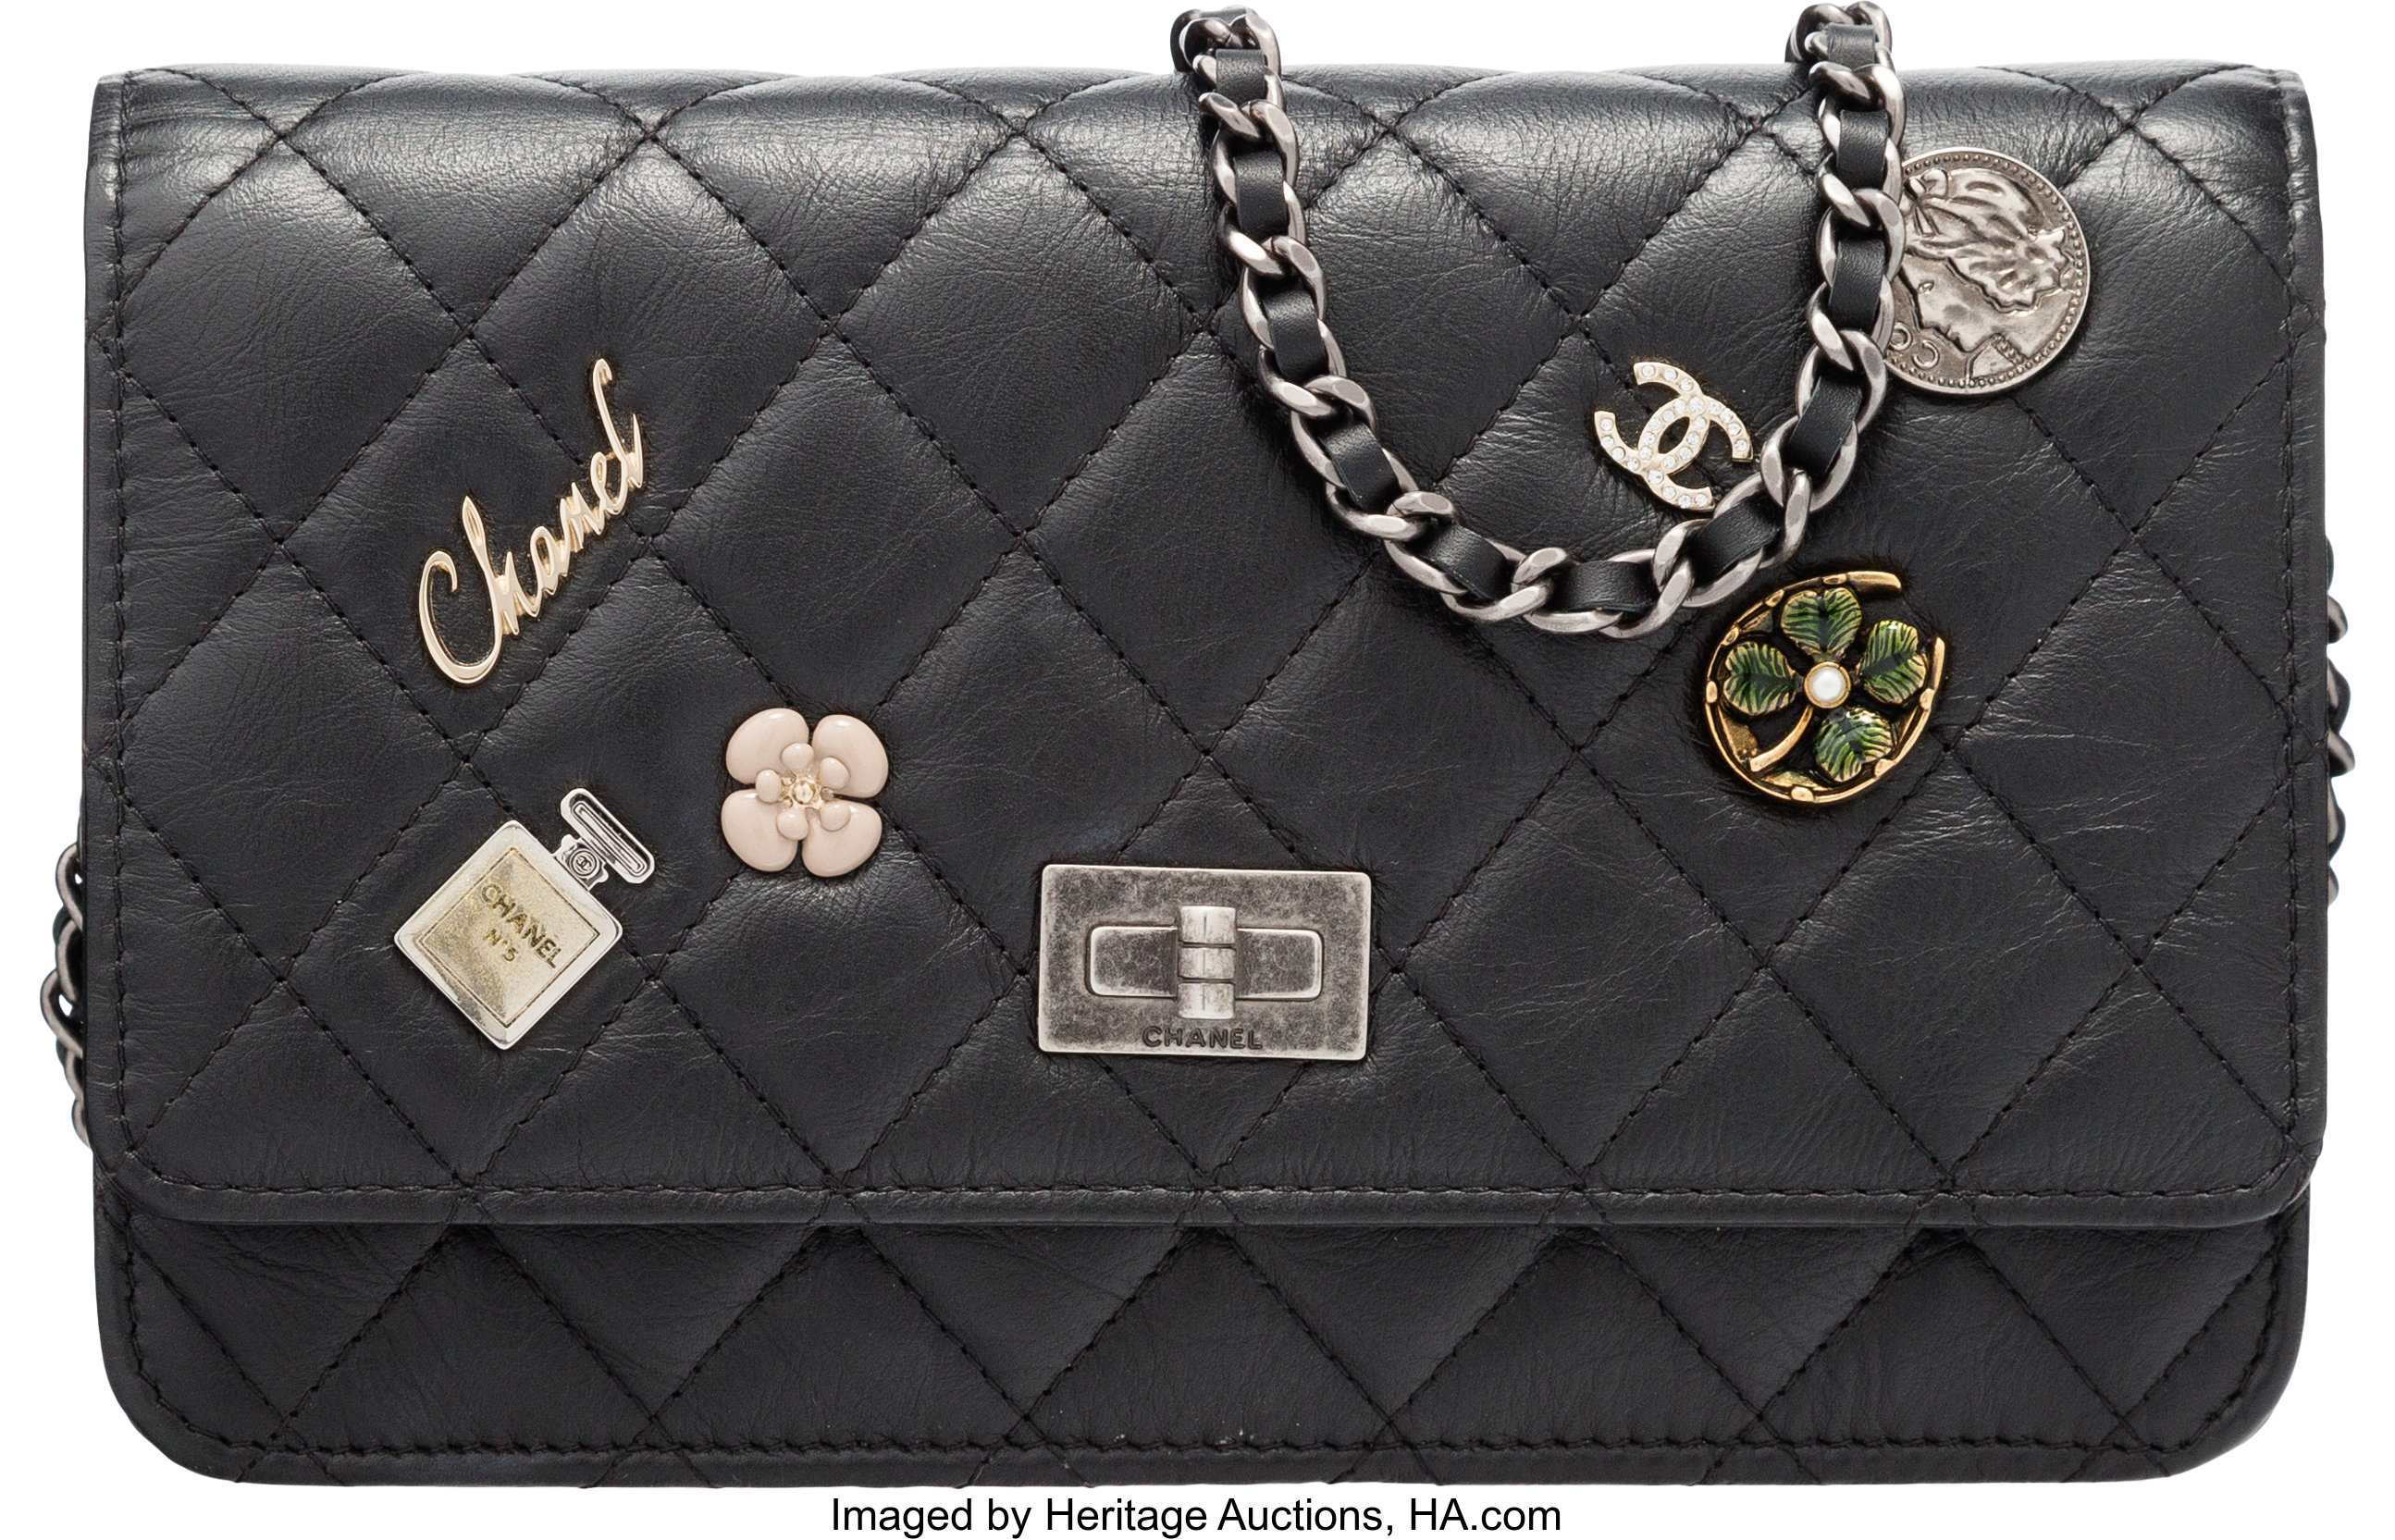 Chanel Limited Edition Black Lucky Charms Wallet on Chain with | Lot #58040  | Heritage Auctions